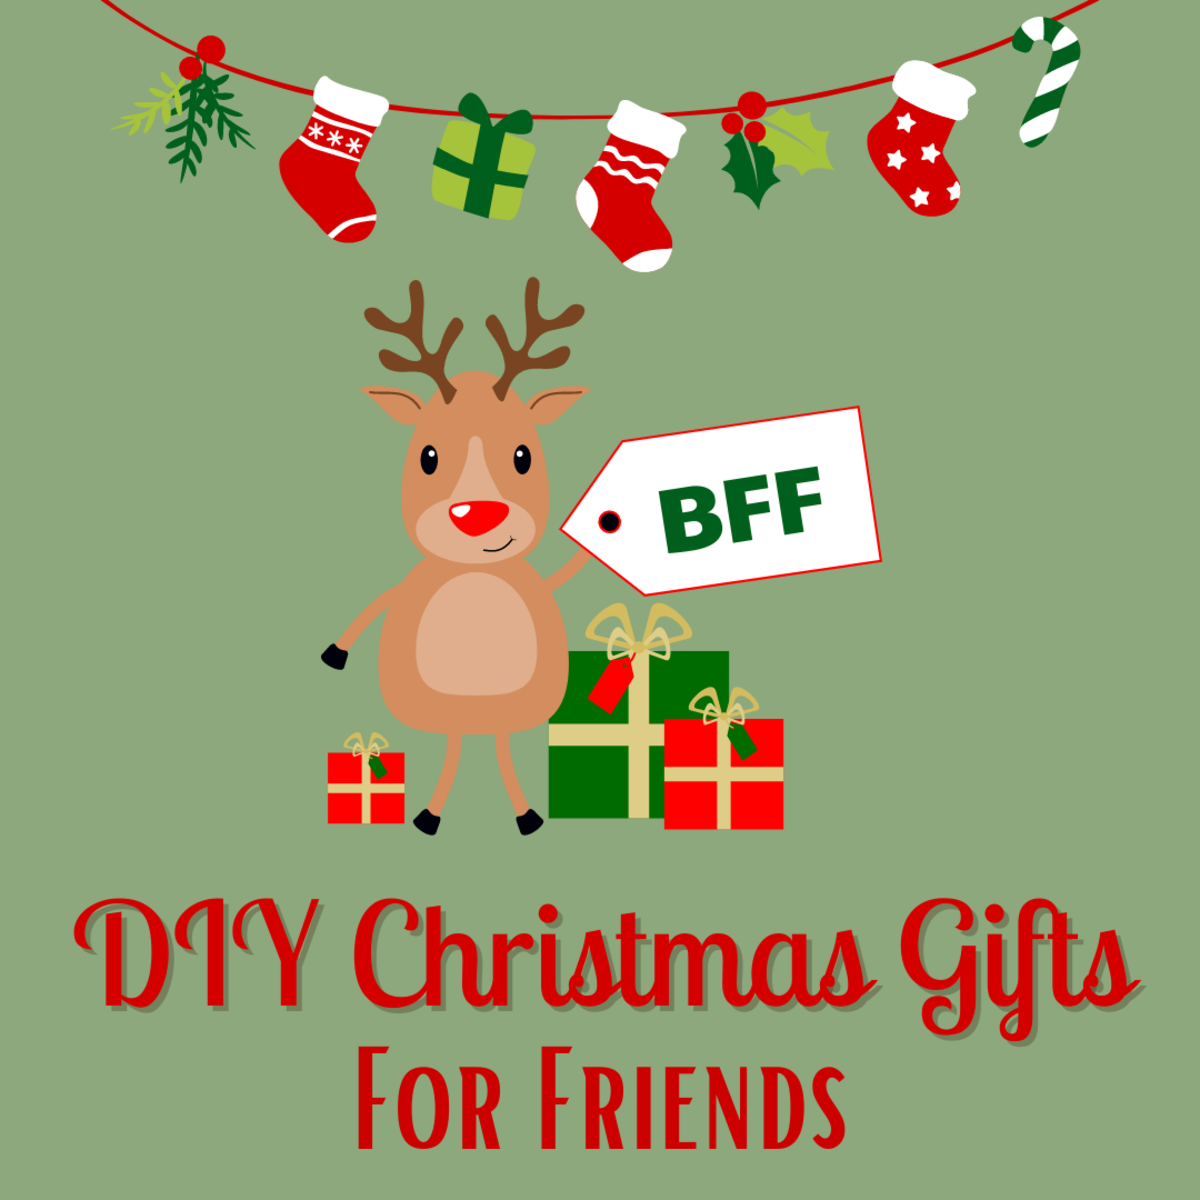 50+ Easy DIY Christmas Gift Ideas for Friends in 2022